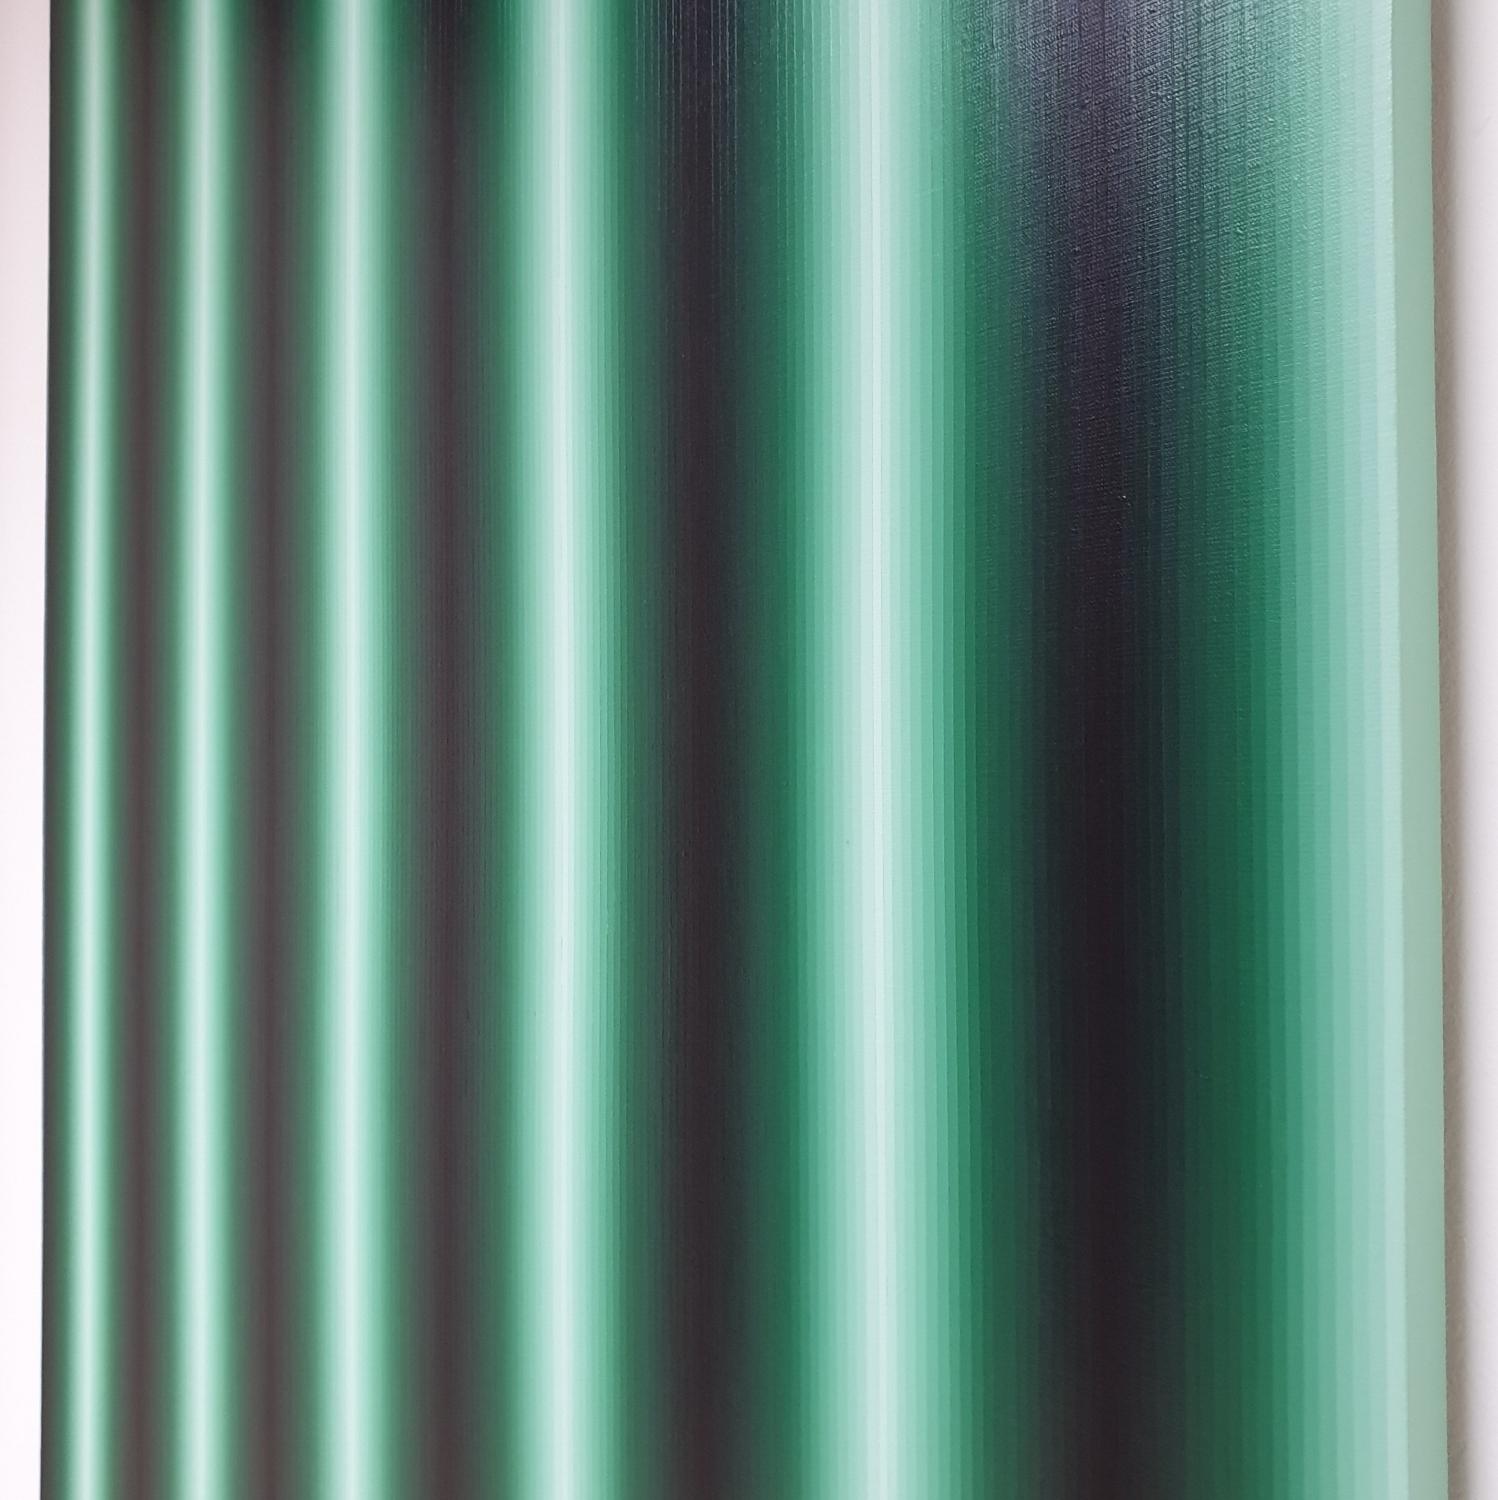 Green Management is a unique contemporary modern painting by renowned Polish-Dutch artist Eliza Kopec. The painting is a typical example of her preferred minimalist abstract geometric vocabulary. 220 carefully hand painted 5 mm wide stripes with a